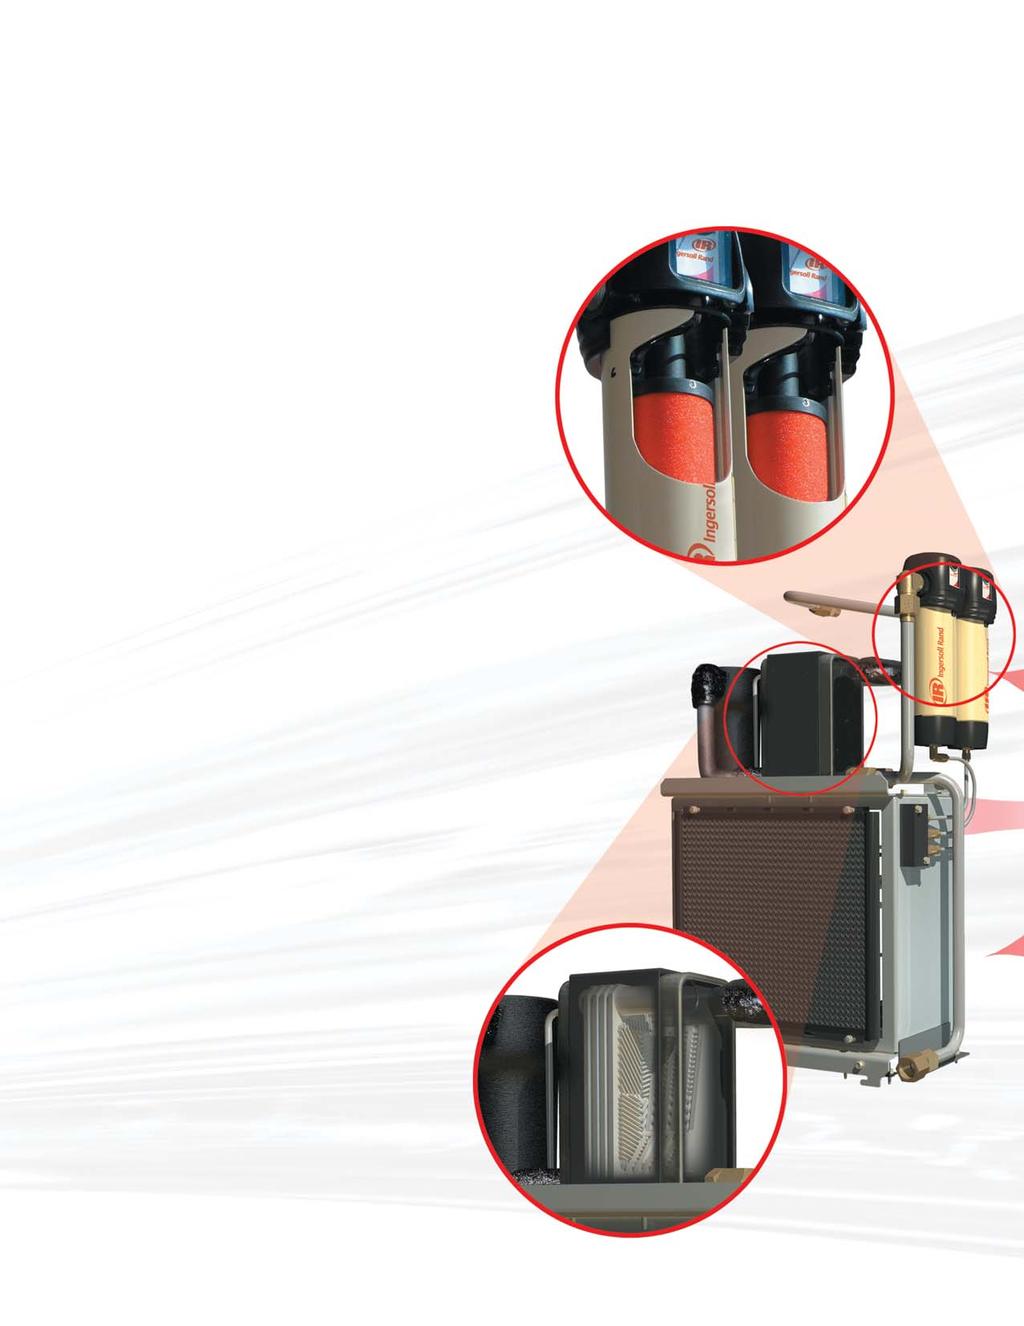 Integral Air Treatment Dual Filtration Pack Clean Air to Drive Productivity Two stages of filtration deliver best performance, reduce pressure losses and extend operating life.